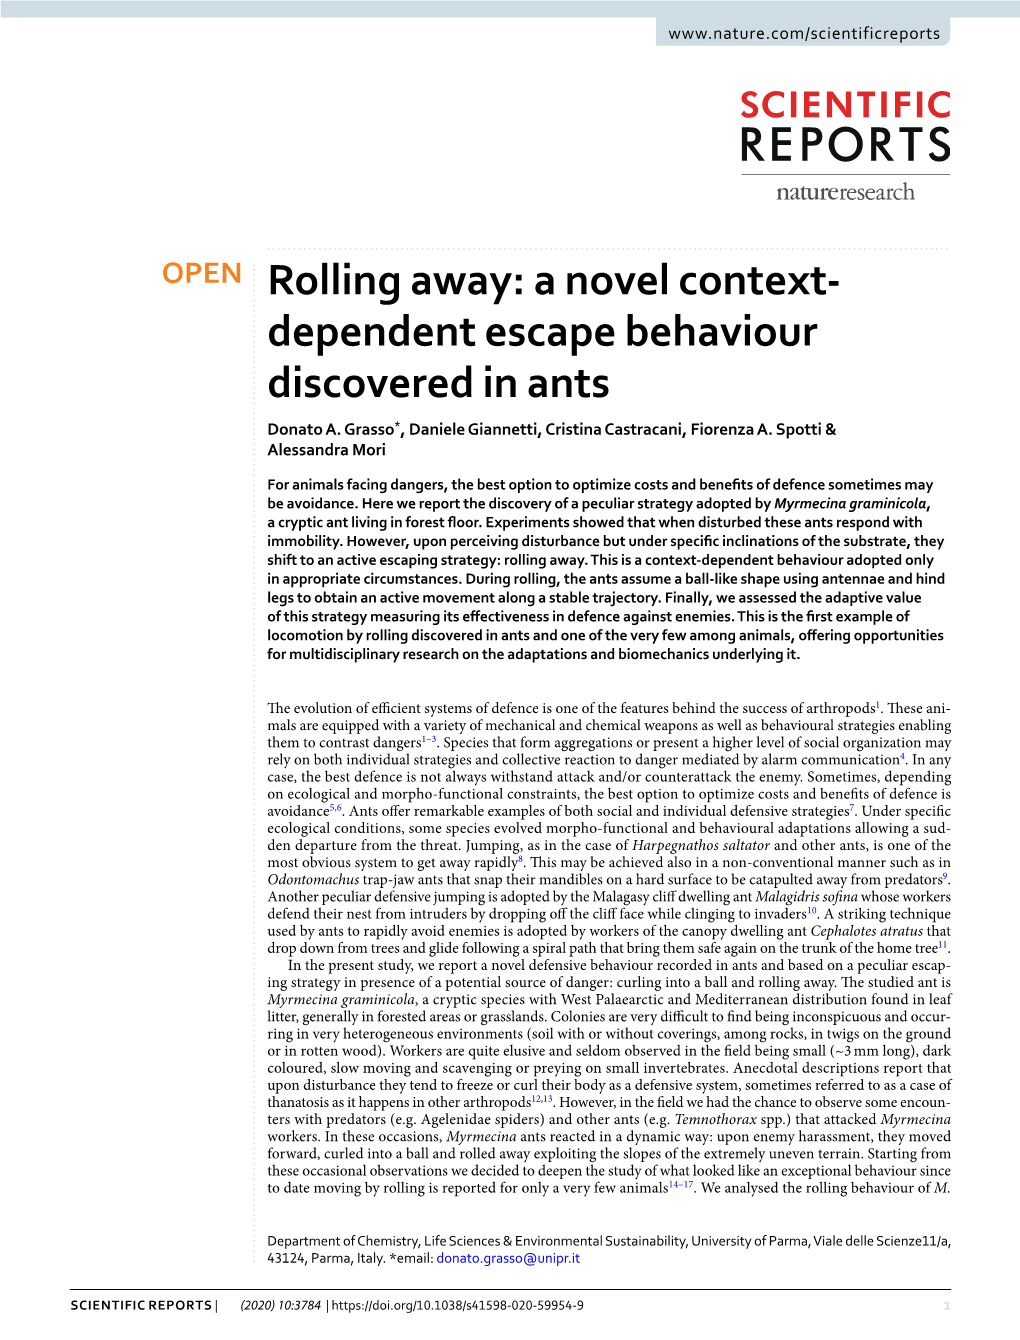 Rolling Away: a Novel Context- Dependent Escape Behaviour Discovered in Ants Donato A